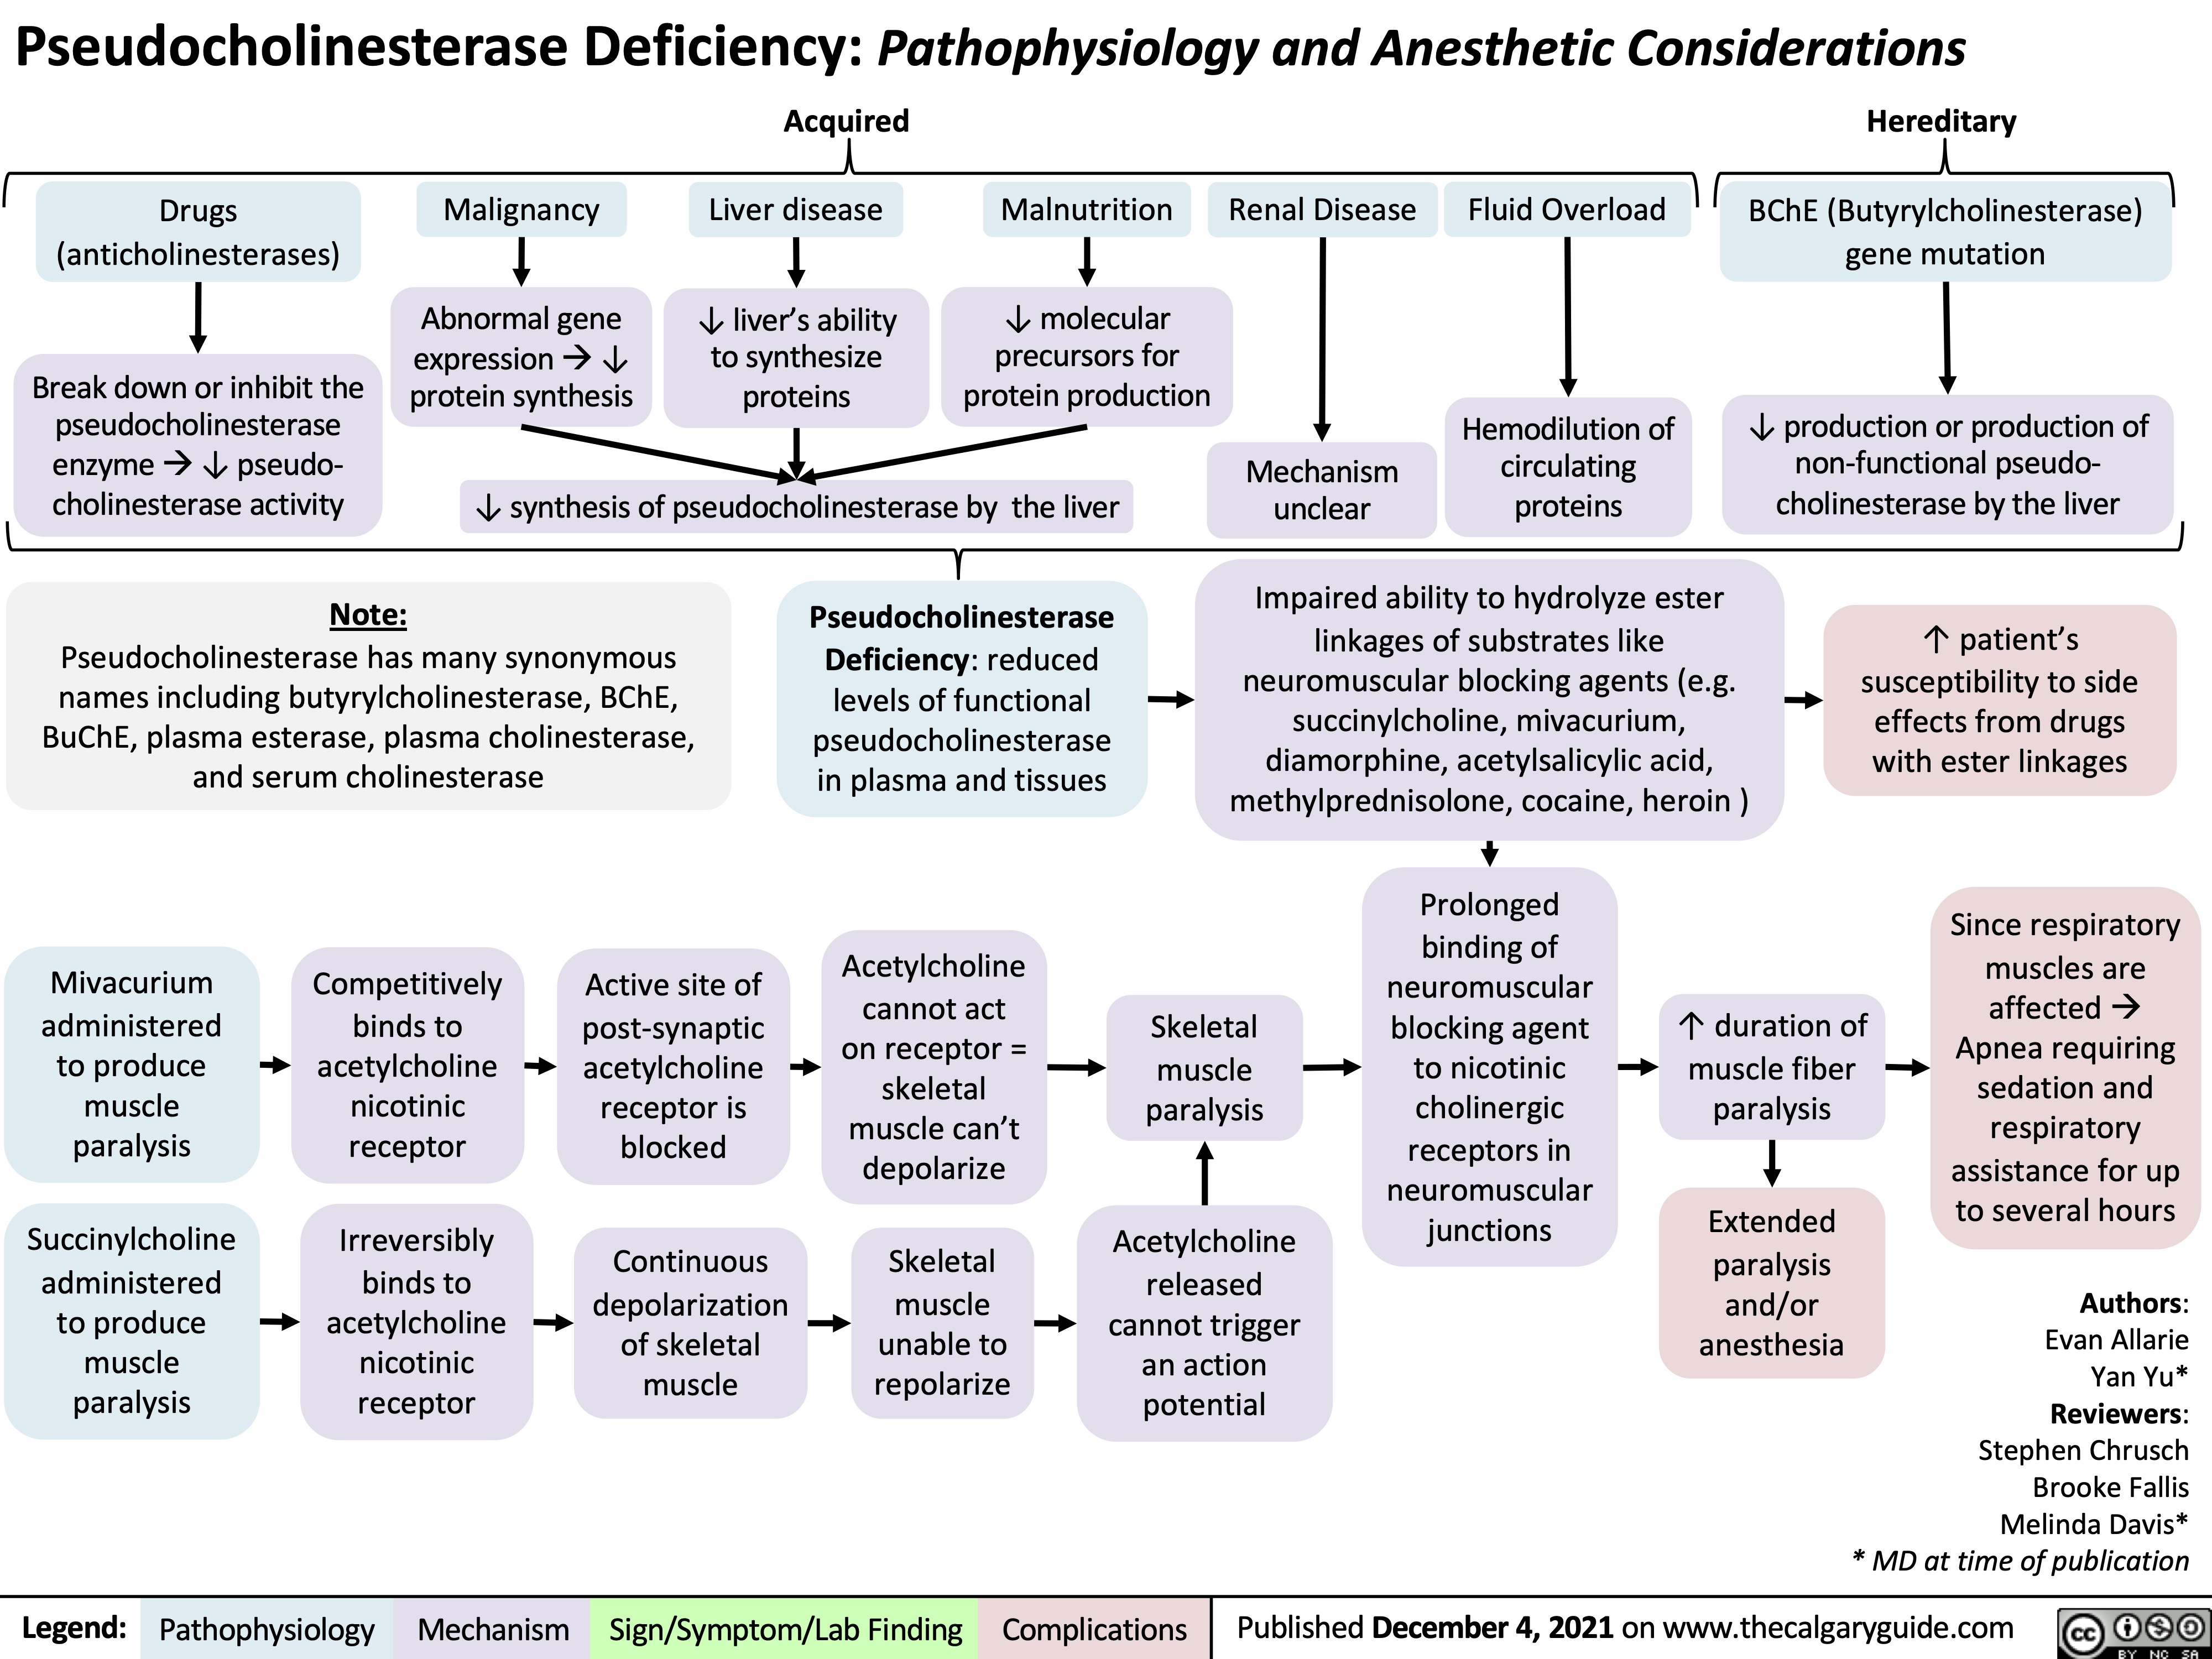 Pseudocholinesterase Deficiency: Pathophysiology and Anesthetic Considerations
         Drugs (anticholinesterases)
Break down or inhibit the pseudocholinesterase enzymeà↓ pseudo- cholinesterase activity
Note:
Pseudocholinesterase has many synonymous
names including butyrylcholinesterase, BChE, BuChE, plasma esterase, plasma cholinesterase, and serum cholinesterase
Malignancy Abnormal gene
expressionà↓ protein synthesis
Acquired
Liver disease
↓ liver’s ability to synthesize proteins
Malnutrition
↓ molecular precursors for protein production
Renal Disease
Mechanism unclear
Fluid Overload
Hemodilution of circulating proteins
Hereditary
BChE (Butyrylcholinesterase) gene mutation
↓ production or production of non-functional pseudo- cholinesterase by the liver
             ↓ synthesis of pseudocholinesterase by the liver
    Pseudocholinesterase Deficiency: reduced levels of functional pseudocholinesterase in plasma and tissues
Impaired ability to hydrolyze ester linkages of substrates like neuromuscular blocking agents (e.g. succinylcholine, mivacurium, diamorphine, acetylsalicylic acid, methylprednisolone, cocaine, heroin )
Prolonged
binding of neuromuscular blocking agent to nicotinic cholinergic receptors in neuromuscular junctions
↑ patient’s susceptibility to side effects from drugs with ester linkages
       Mivacurium administered to produce muscle paralysis
Succinylcholine administered
to produce muscle paralysis
Competitively binds to acetylcholine nicotinic receptor
Irreversibly binds to acetylcholine nicotinic receptor
Active site of post-synaptic acetylcholine receptor is blocked
Continuous depolarization
of skeletal muscle
Acetylcholine cannot act on receptor = skeletal muscle can’t depolarize
Skeletal muscle unable to repolarize
Skeletal muscle paralysis
Acetylcholine released cannot trigger an action potential
↑ duration of muscle fiber paralysis
Since respiratory muscles are affectedà Apnea requiring sedation and respiratory assistance for up to several hours
   Extended paralysis and/or anesthesia
Authors: Evan Allarie Yan Yu* Reviewers: Stephen Chrusch Brooke Fallis Melinda Davis* * MD at time of publication
      Legend:
 Pathophysiology
 Mechanism
Sign/Symptom/Lab Finding
 Complications
Published December 4, 2021 on www.thecalgaryguide.com
   